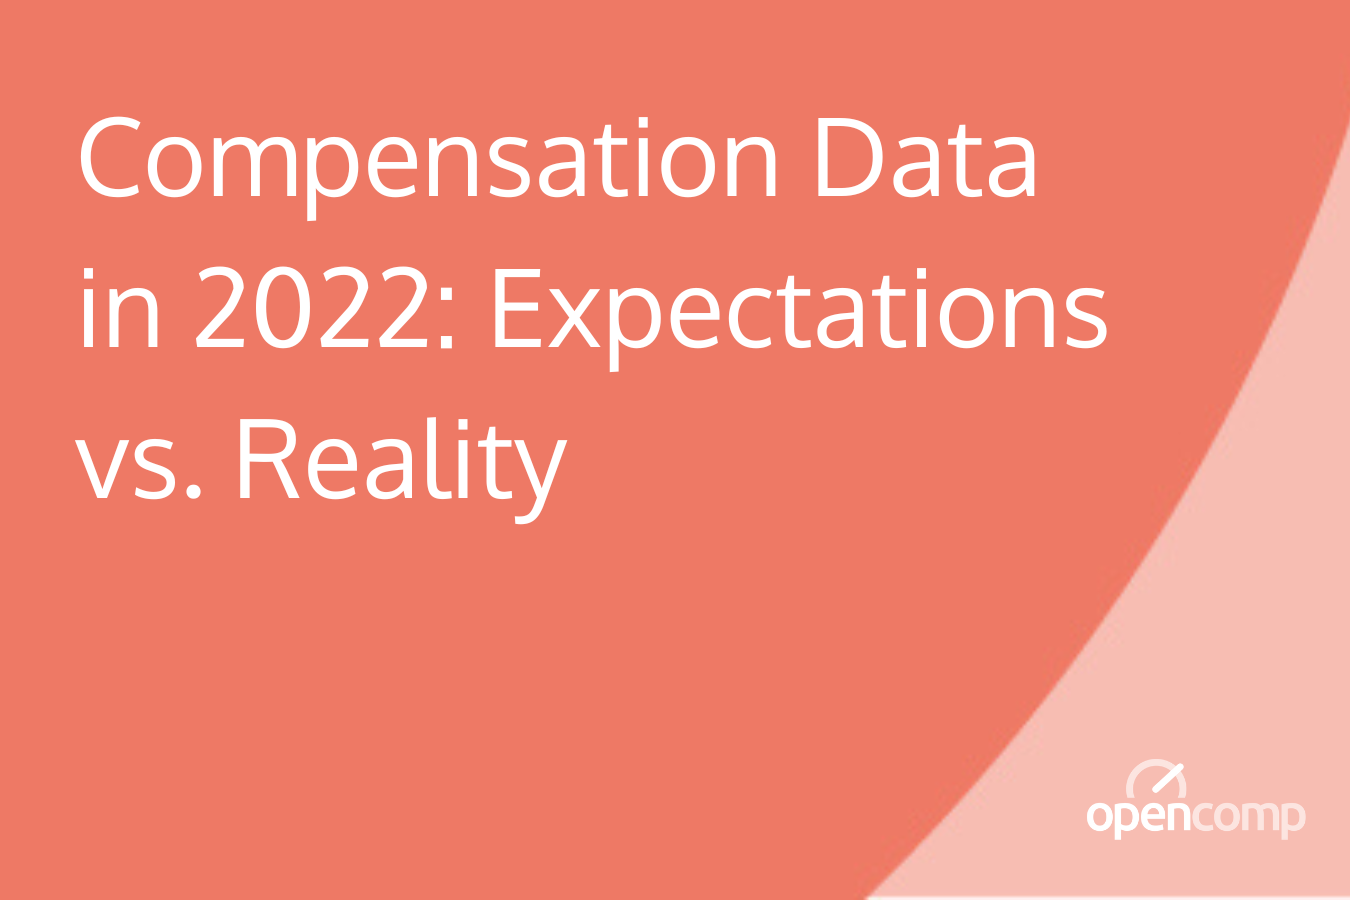 Compensation Data in 2022 Expectations vs. Reality